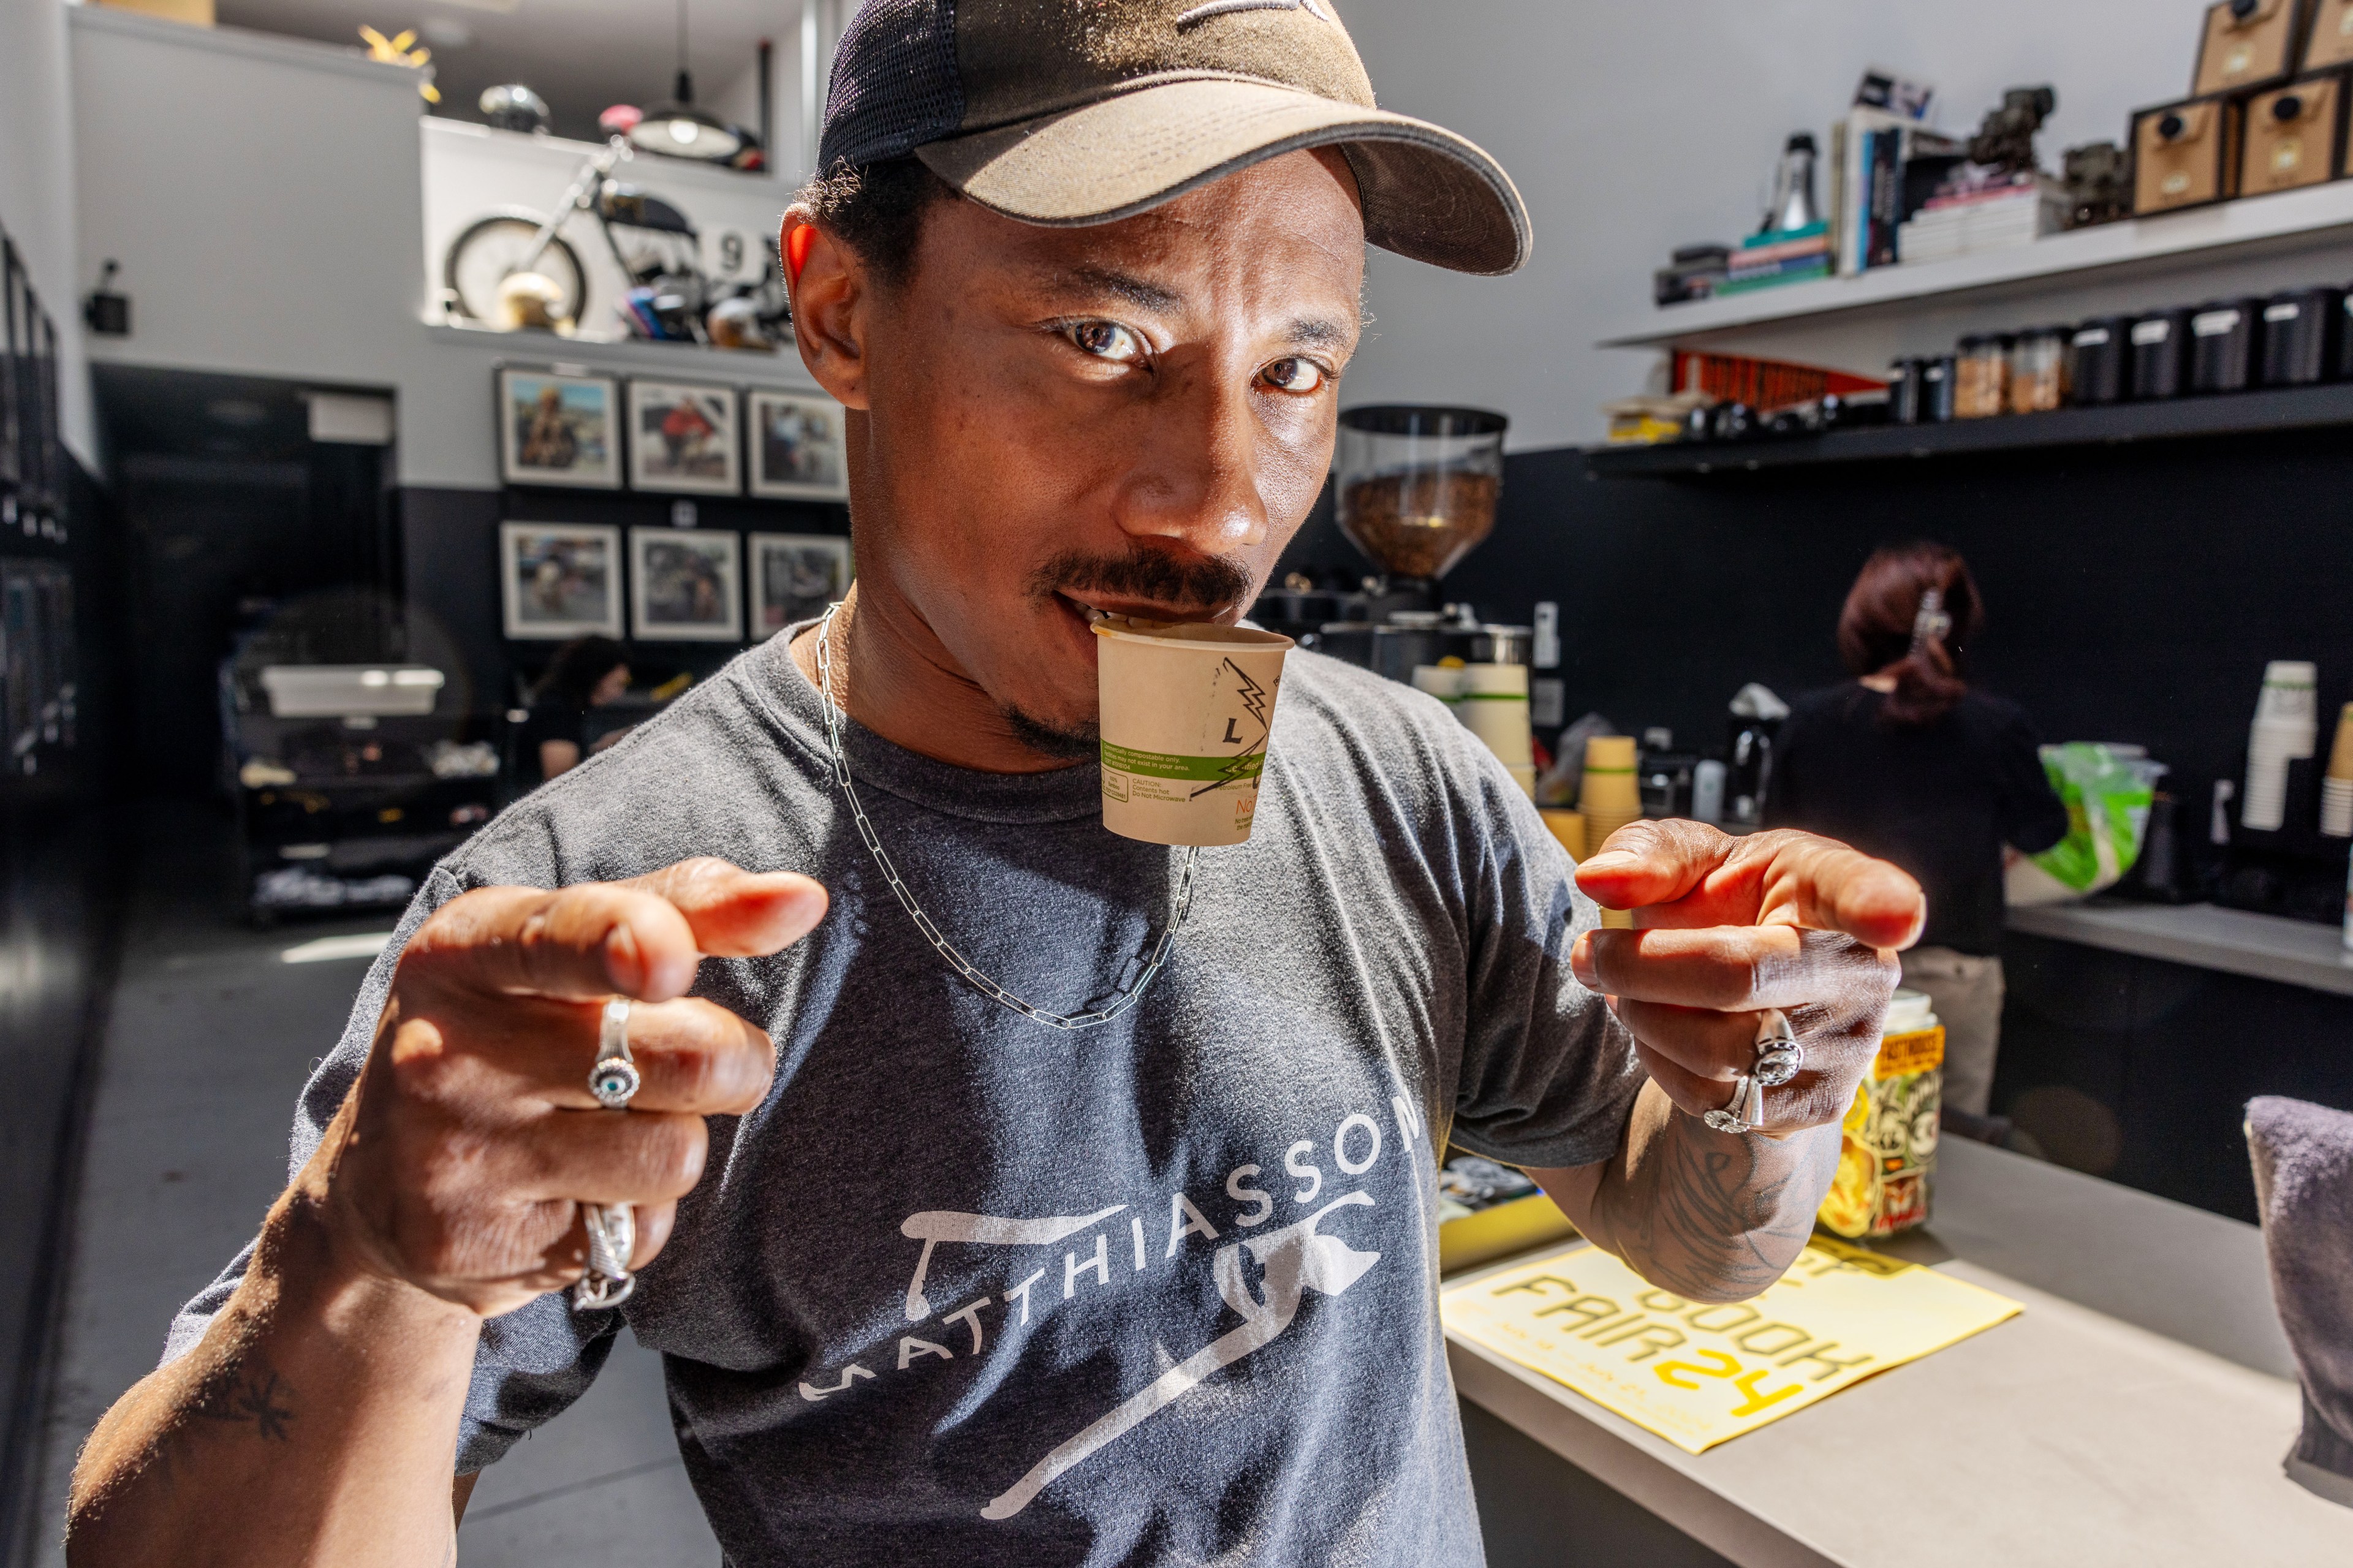 A man points at the camera while holding a small cup in his mouth. He wears a t-shirt, cap, and chain with a busy cafe scene behind him featuring shelves and a barista.